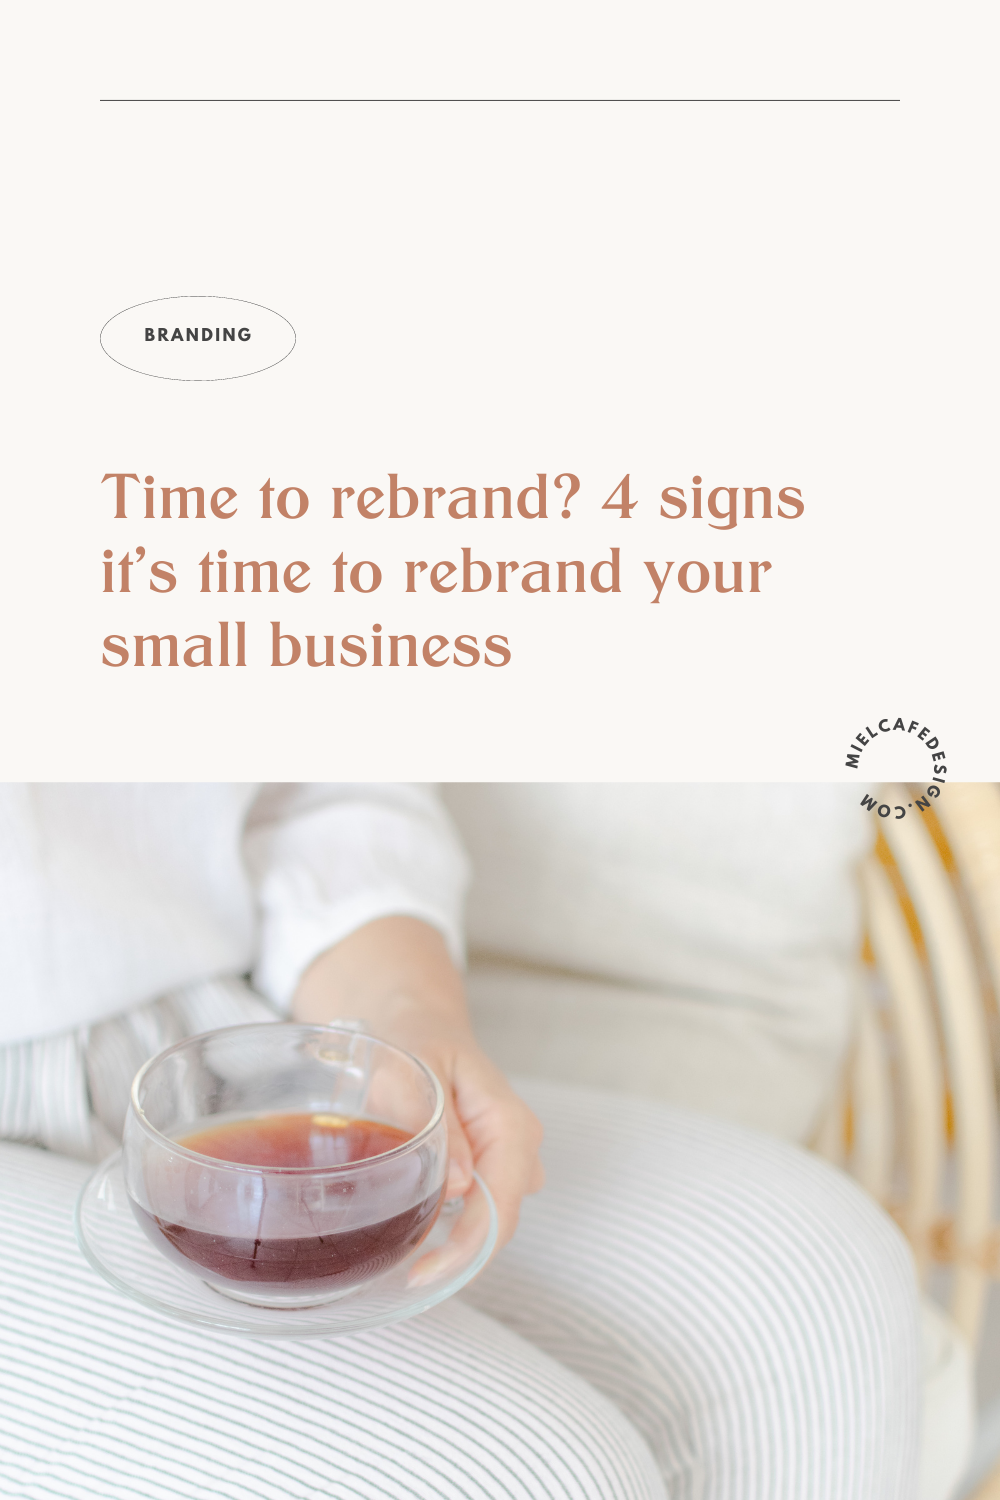 Time to rebrand? 4 signs it’s time to rebrand your small business